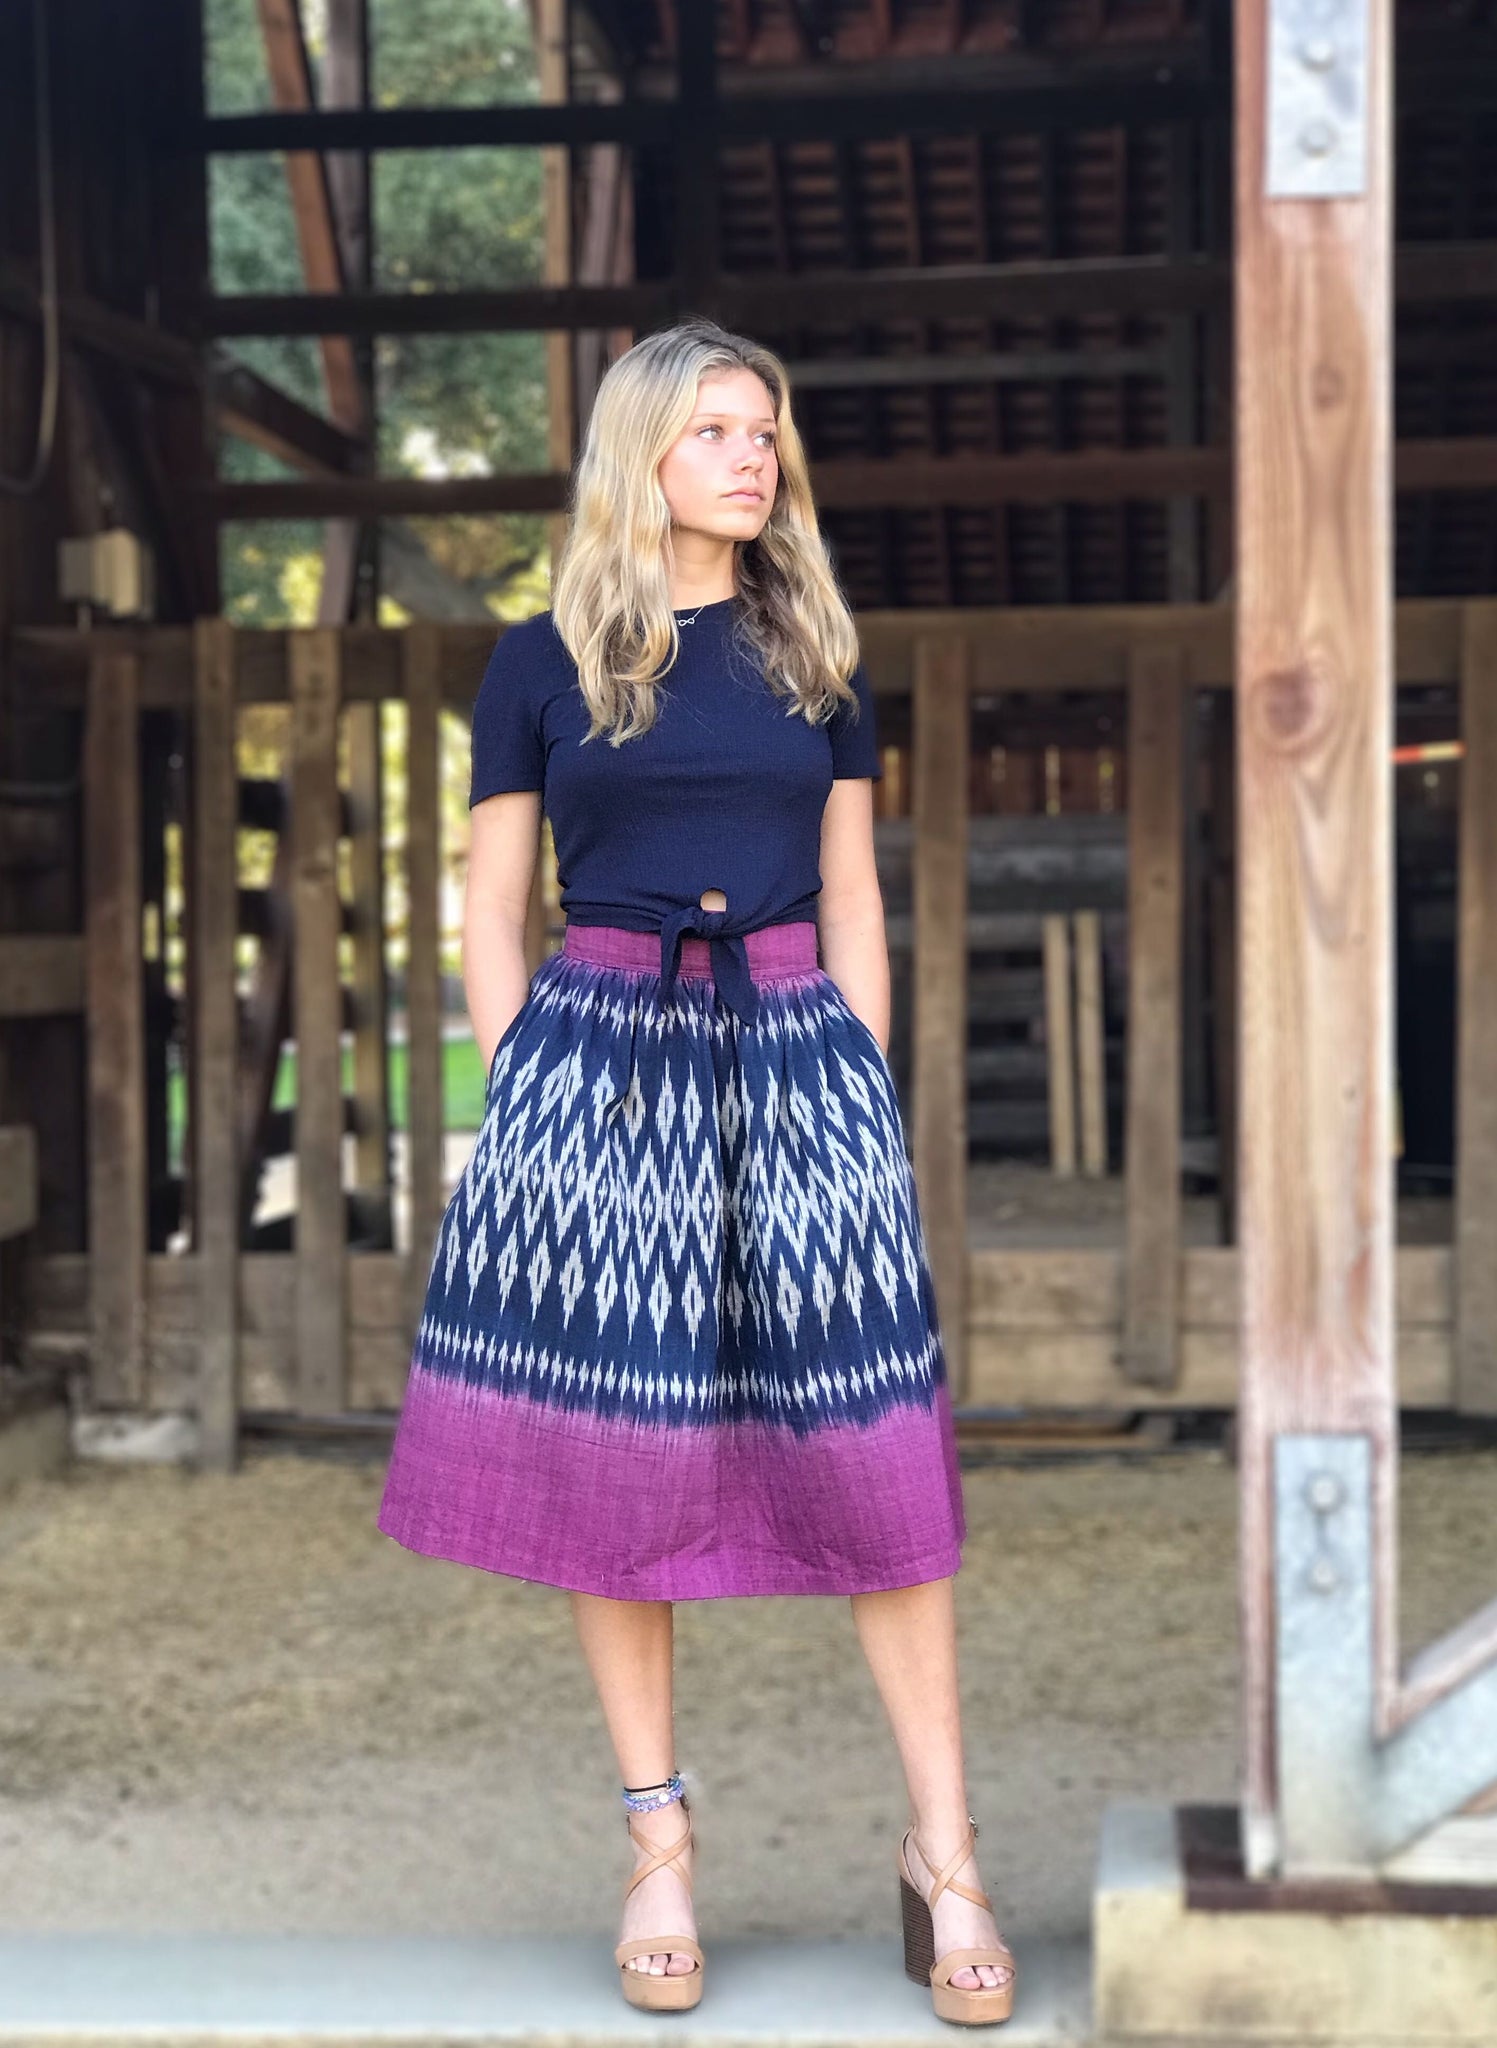 She's rocking this look wearing the murberry cotton ikat skirt